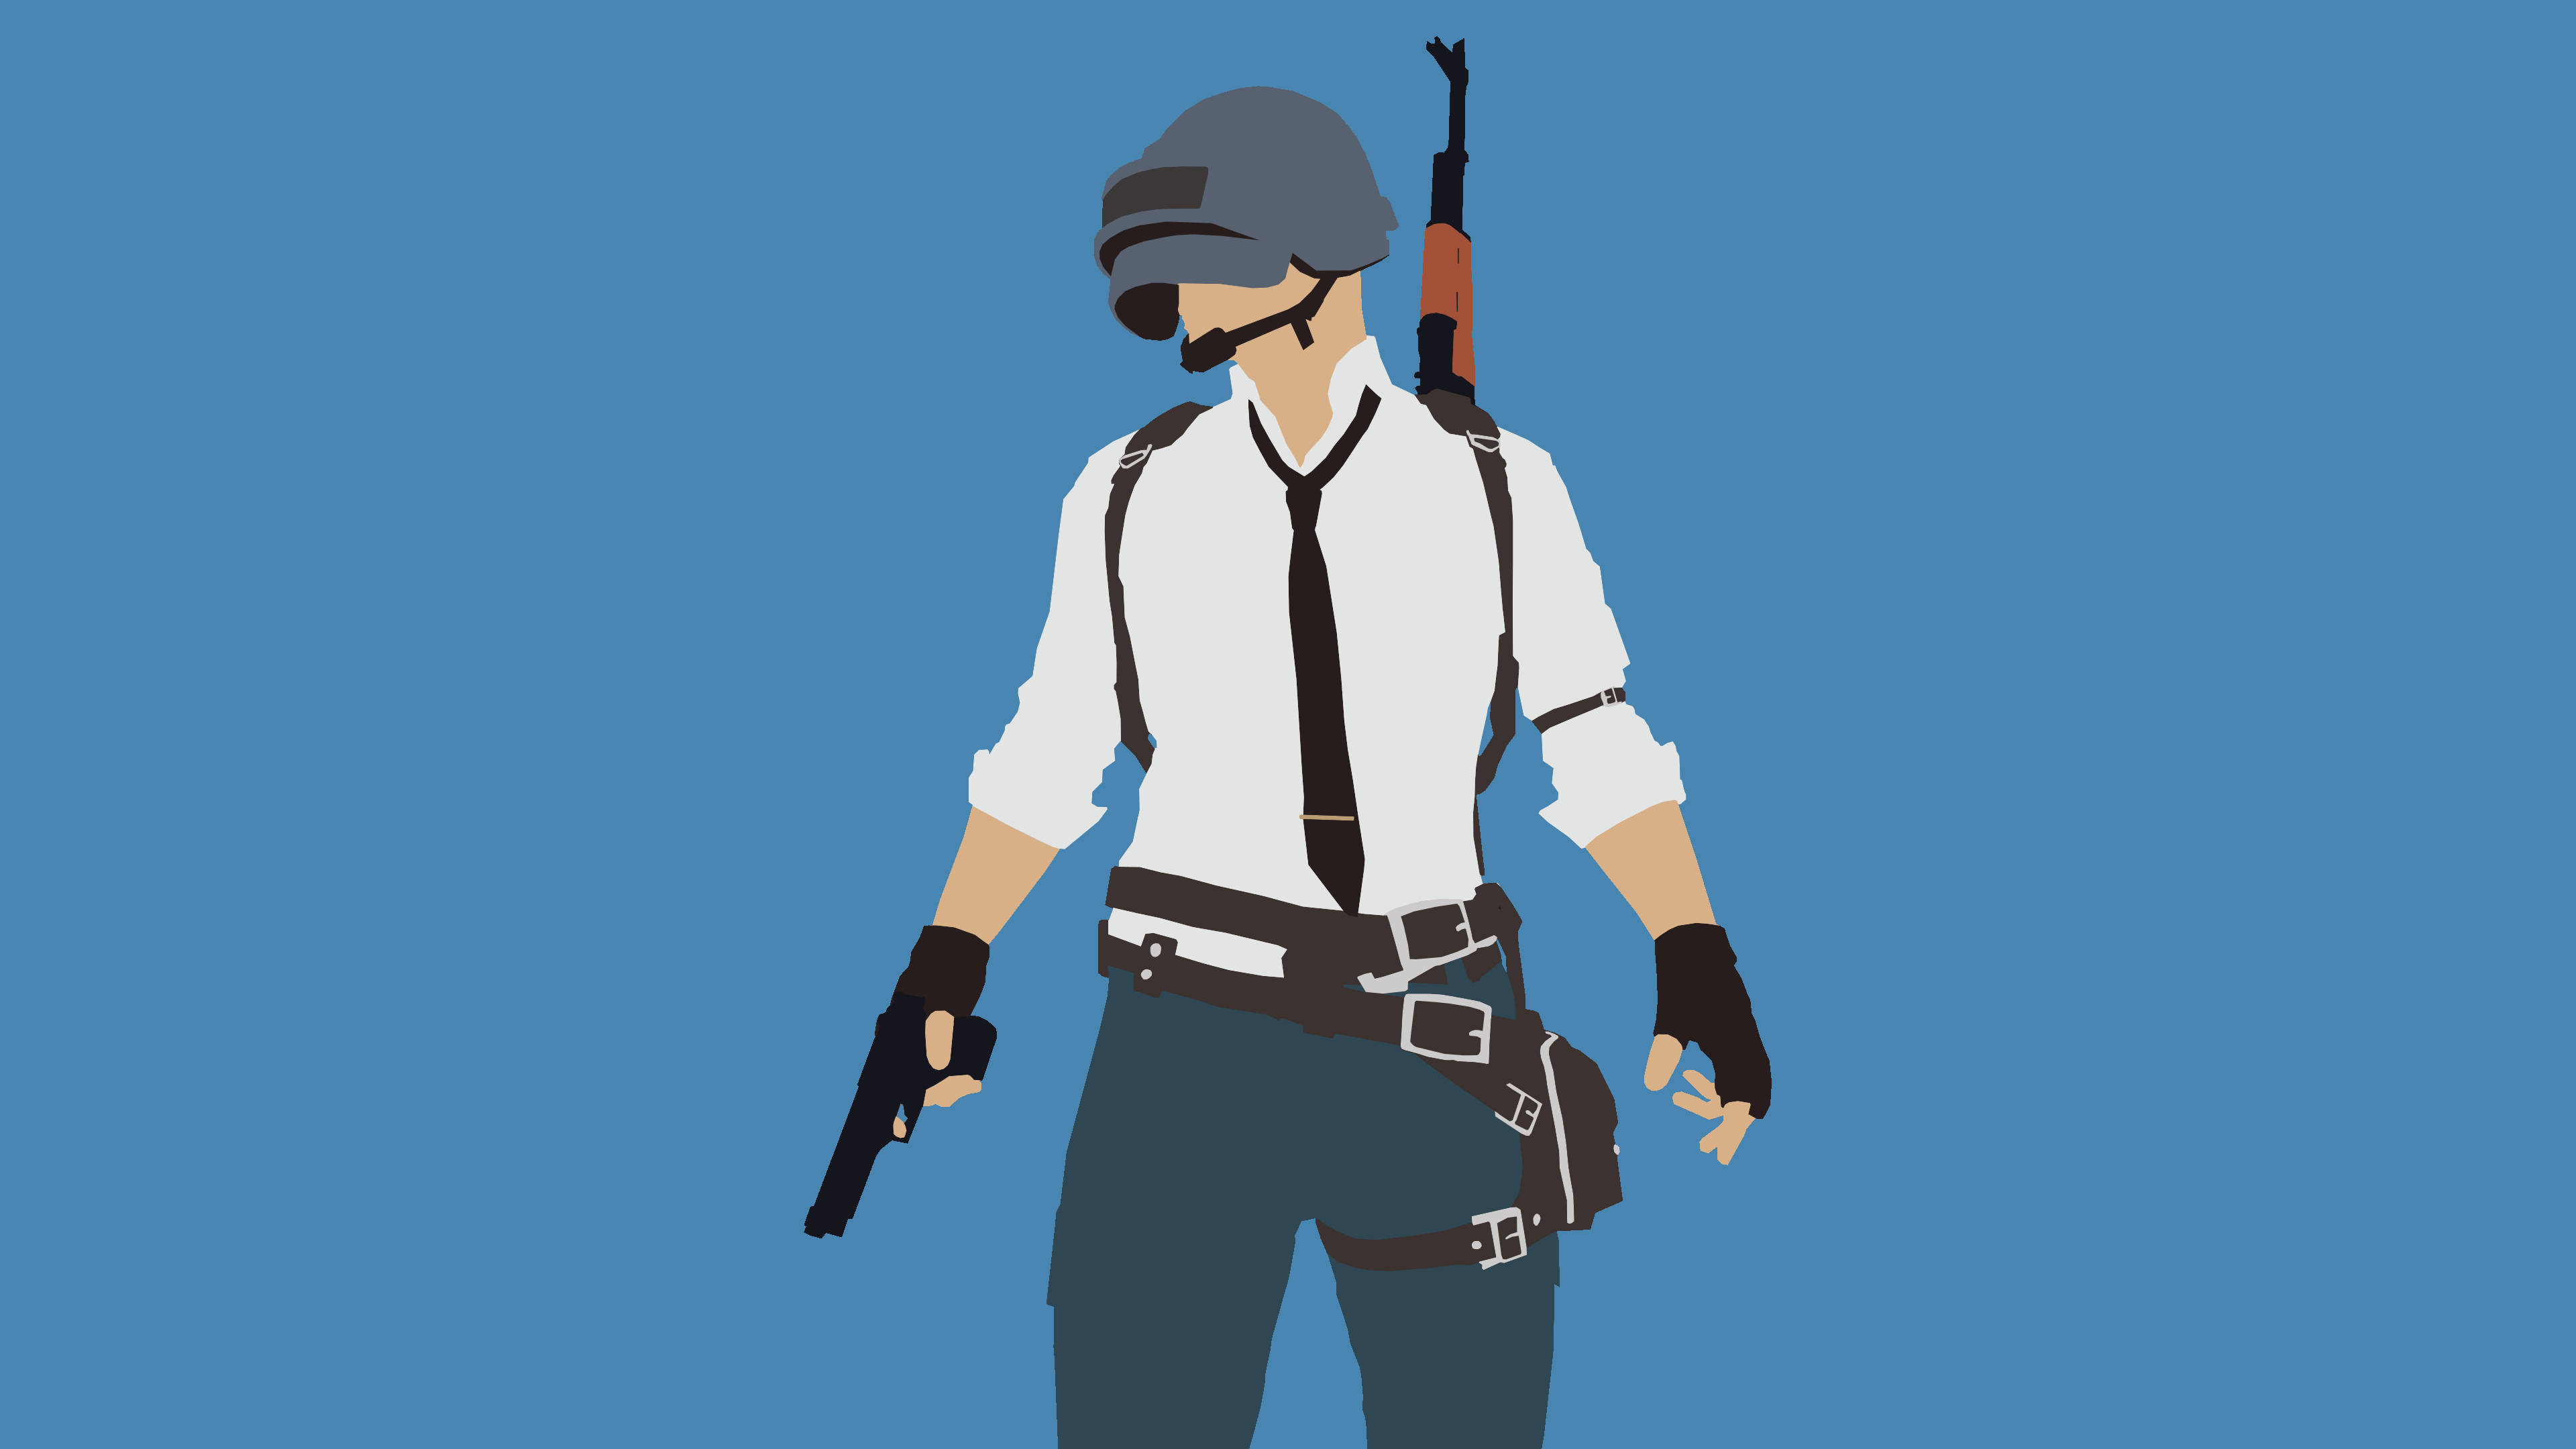 Download Hd Pubg Character On Blue Background Wallpaper 